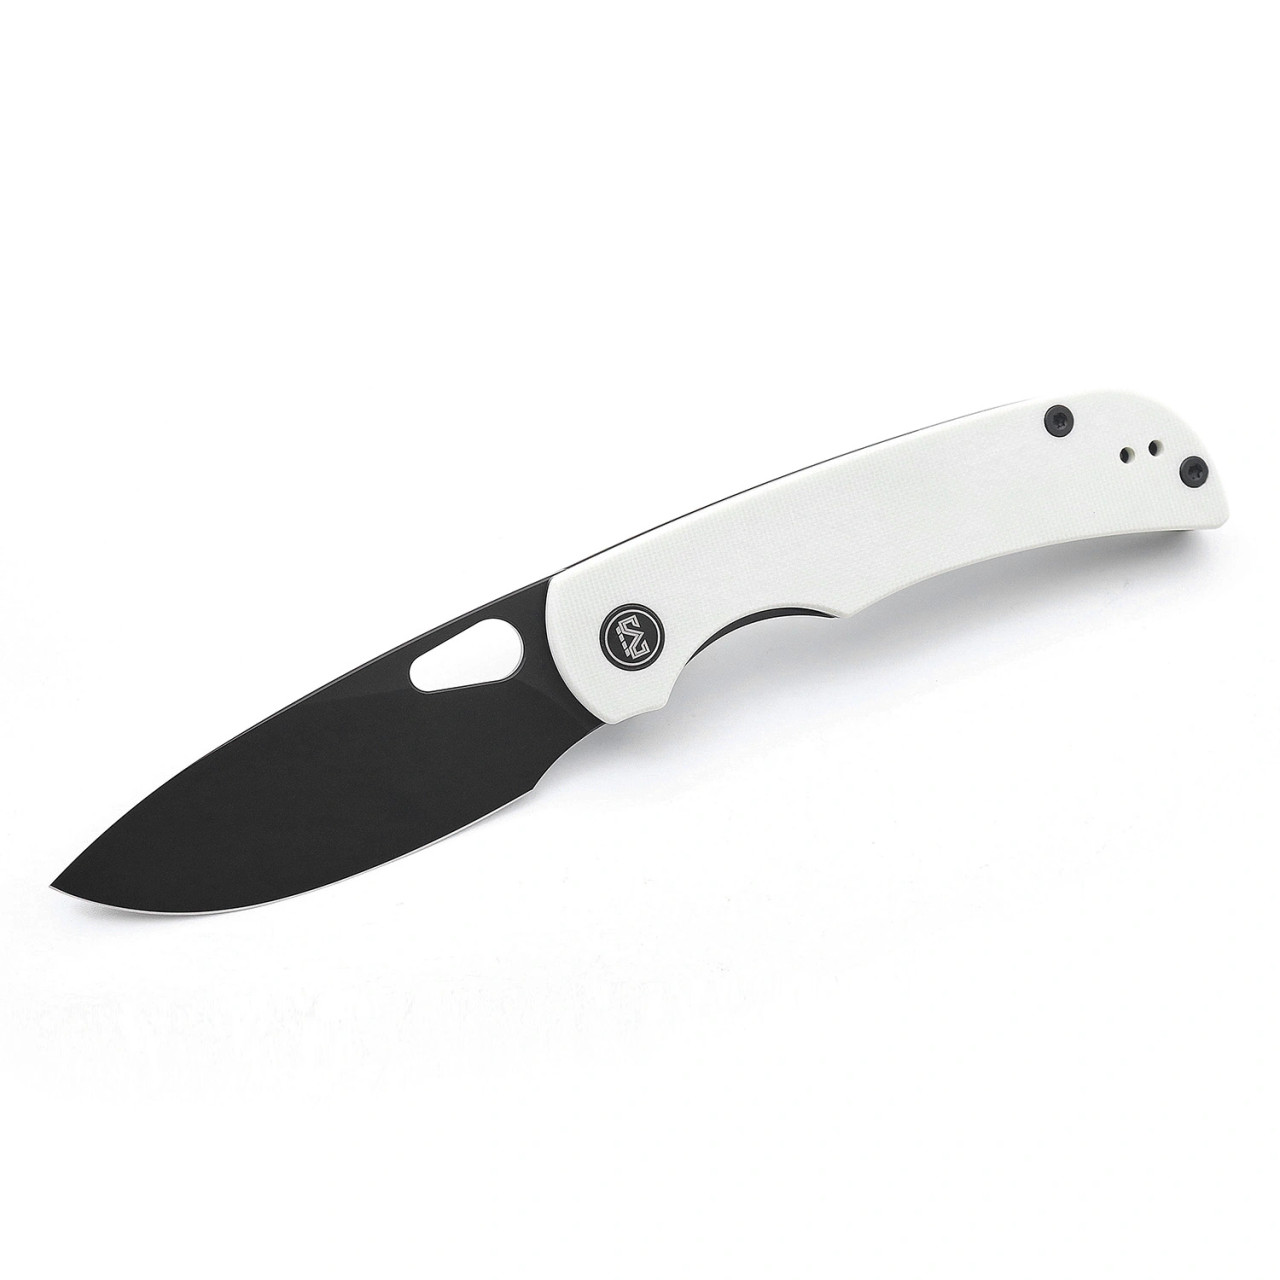 Sale - CRKT Clearance - White Mountain Knives